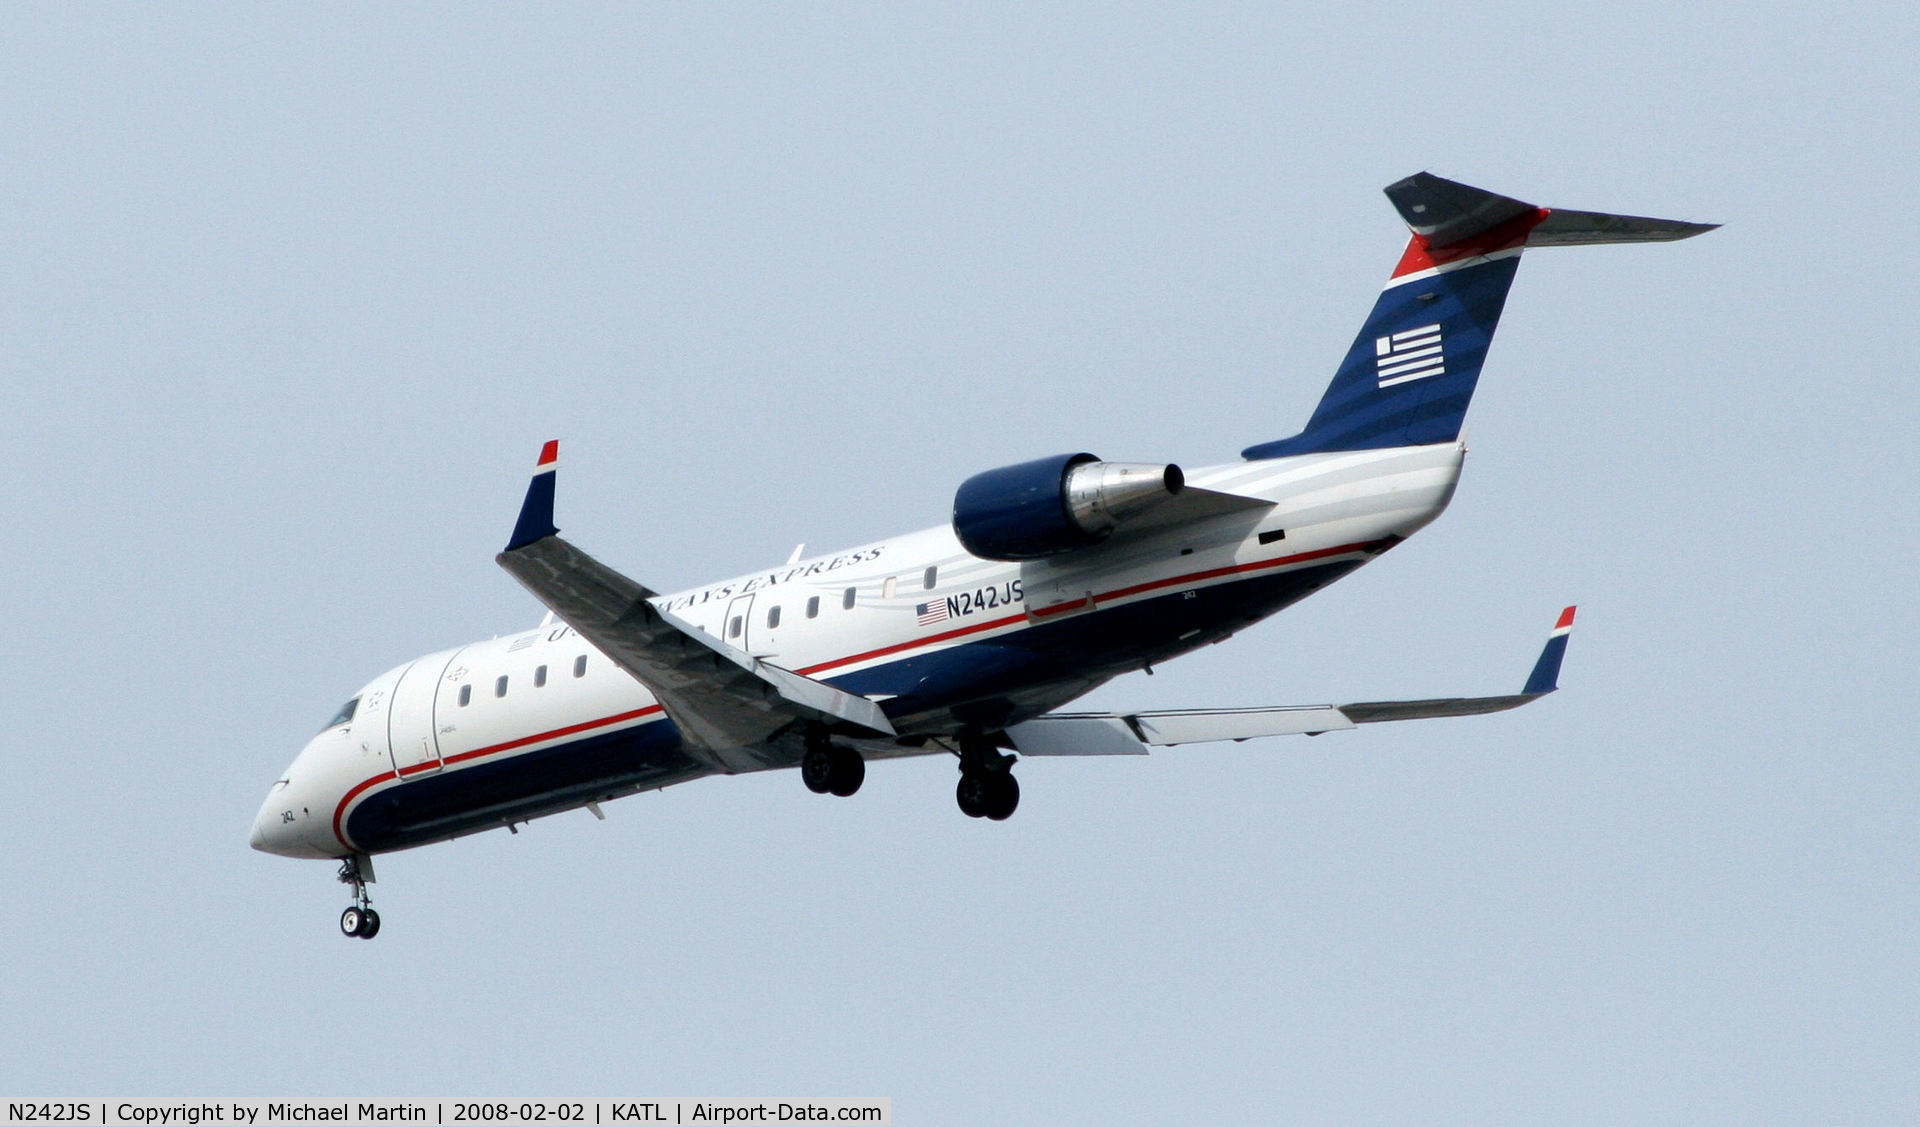 N242JS, 2004 Bombardier CRJ-200ER (CL-600-2B19) C/N 7911, Over the numbers of 26R